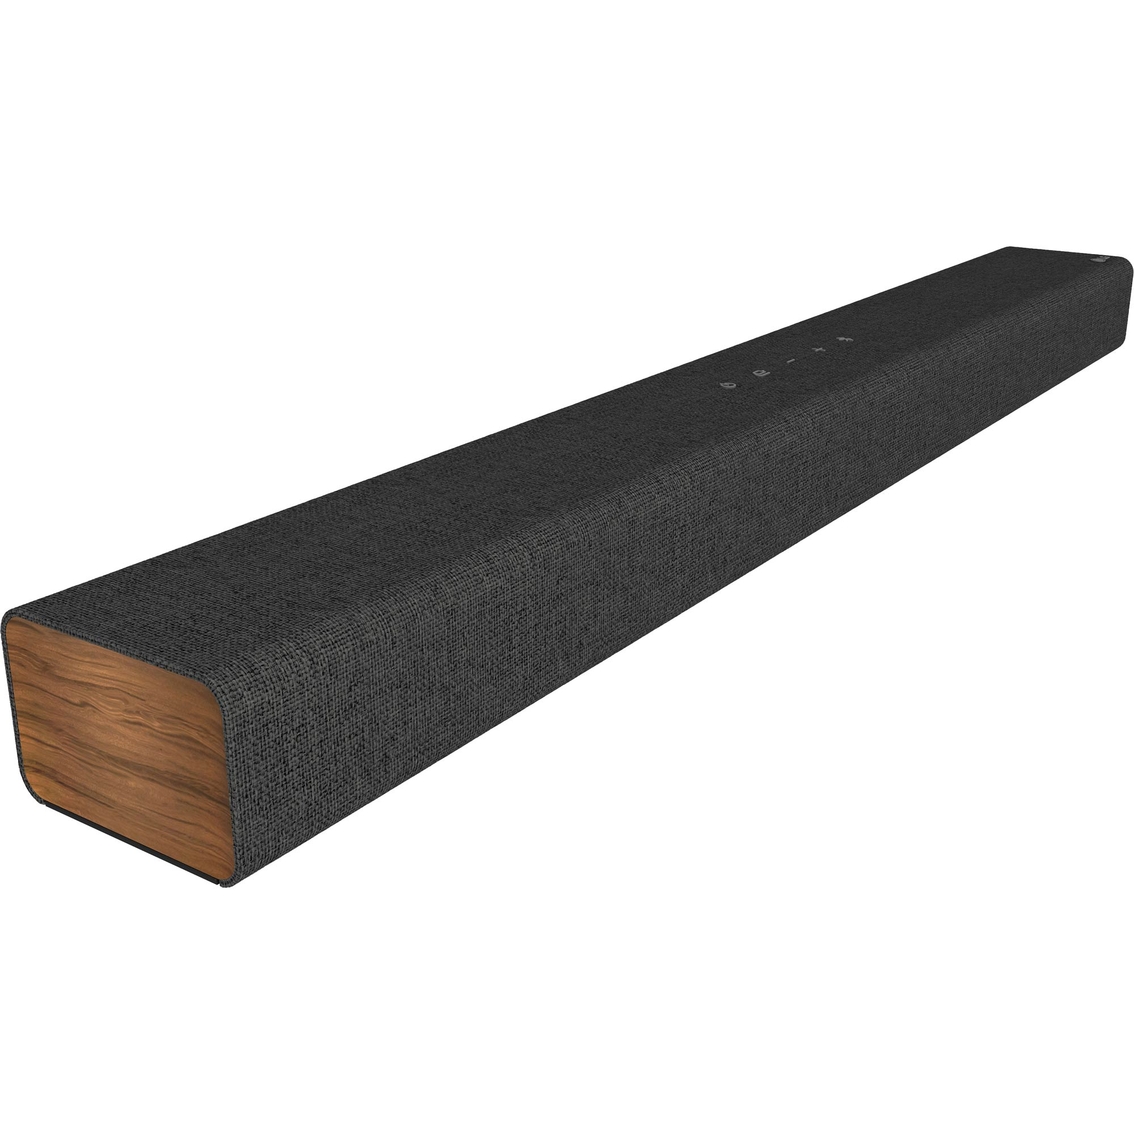 LG SP2 2.1 Channel 100W Sound Bar with Bluetooth and Built-In Subwoofer - Image 5 of 8